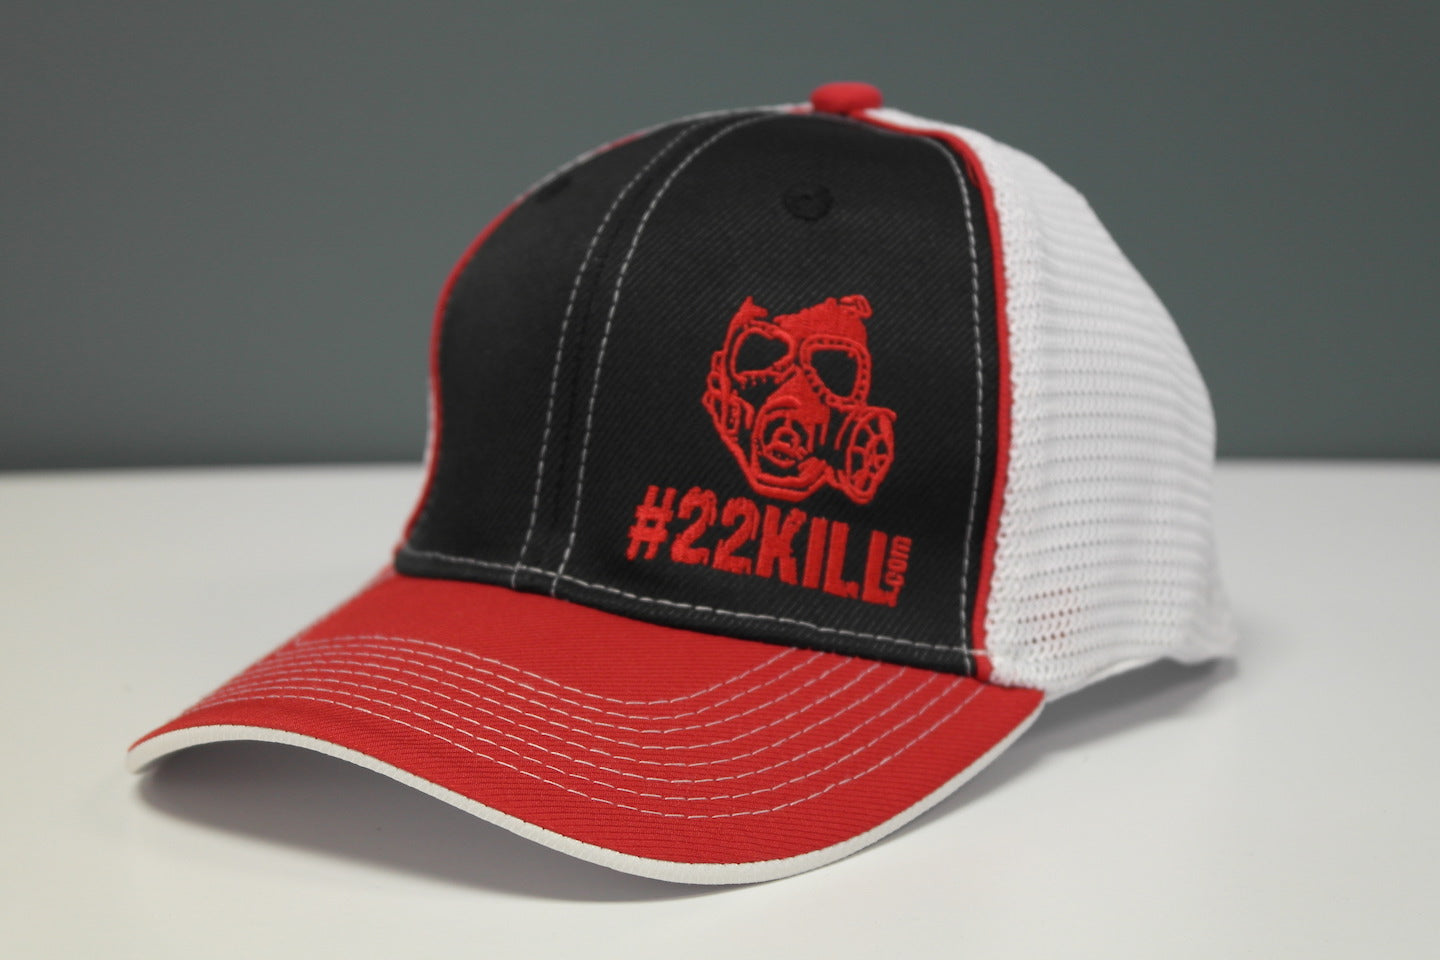 #22KILL flexfit hat in red, white and black.